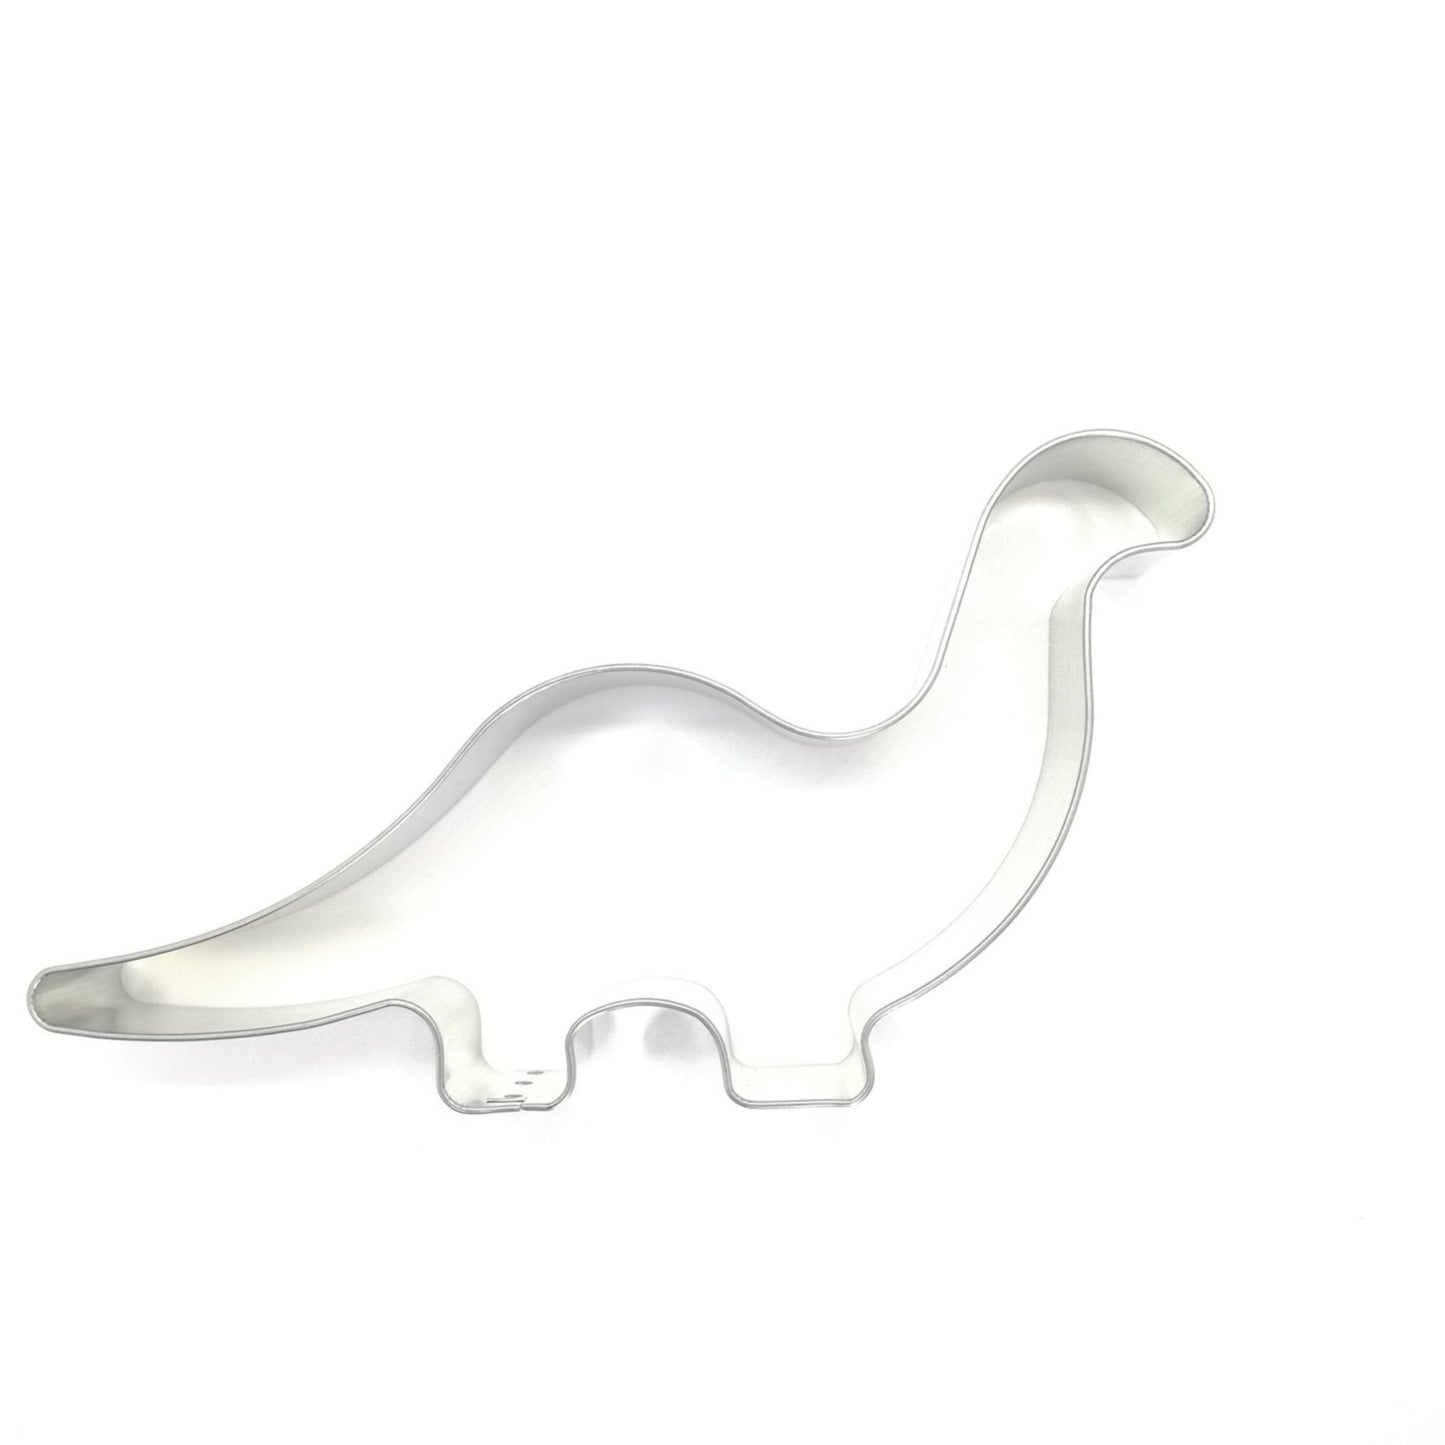 Brontosaurus Cookie Cutter - Must Love Party